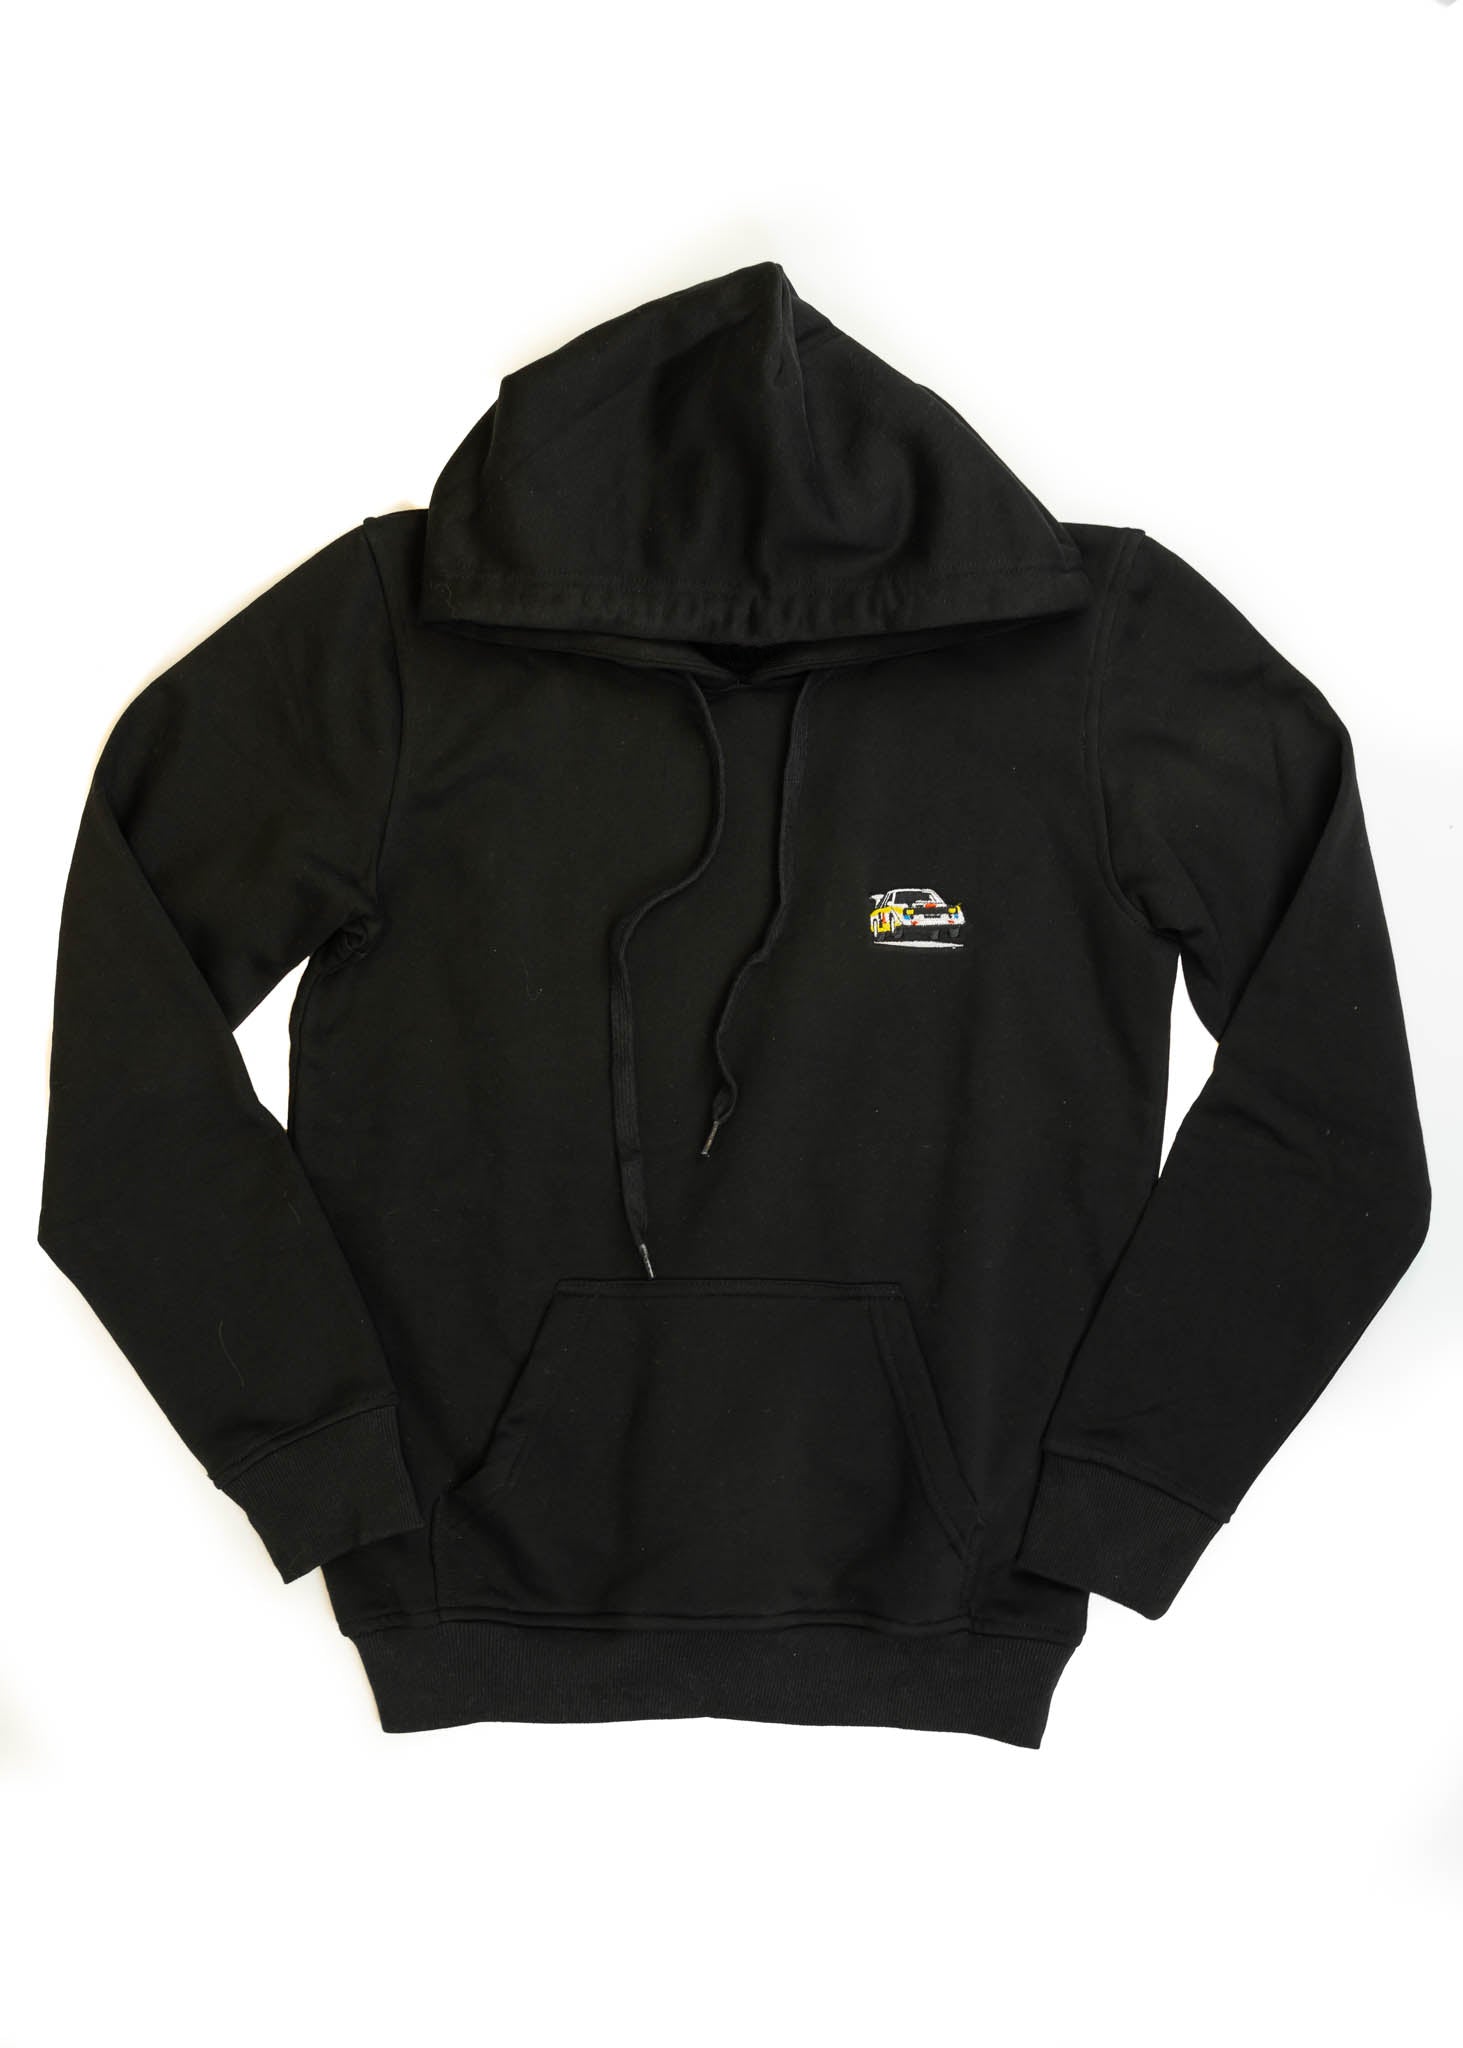 A black Audi hoodie for men and women. Photo is a front view of the sweater with an embroidered Audi Sport Quattro S1 E2. Fabric composition is cotton, polyester, and rayon. The material is very soft, stretchy, anti-shrink, and non-transparent. The style of this hoodie is long sleeve, crewneck with a hood, hooded, with embroidery on the left chest.